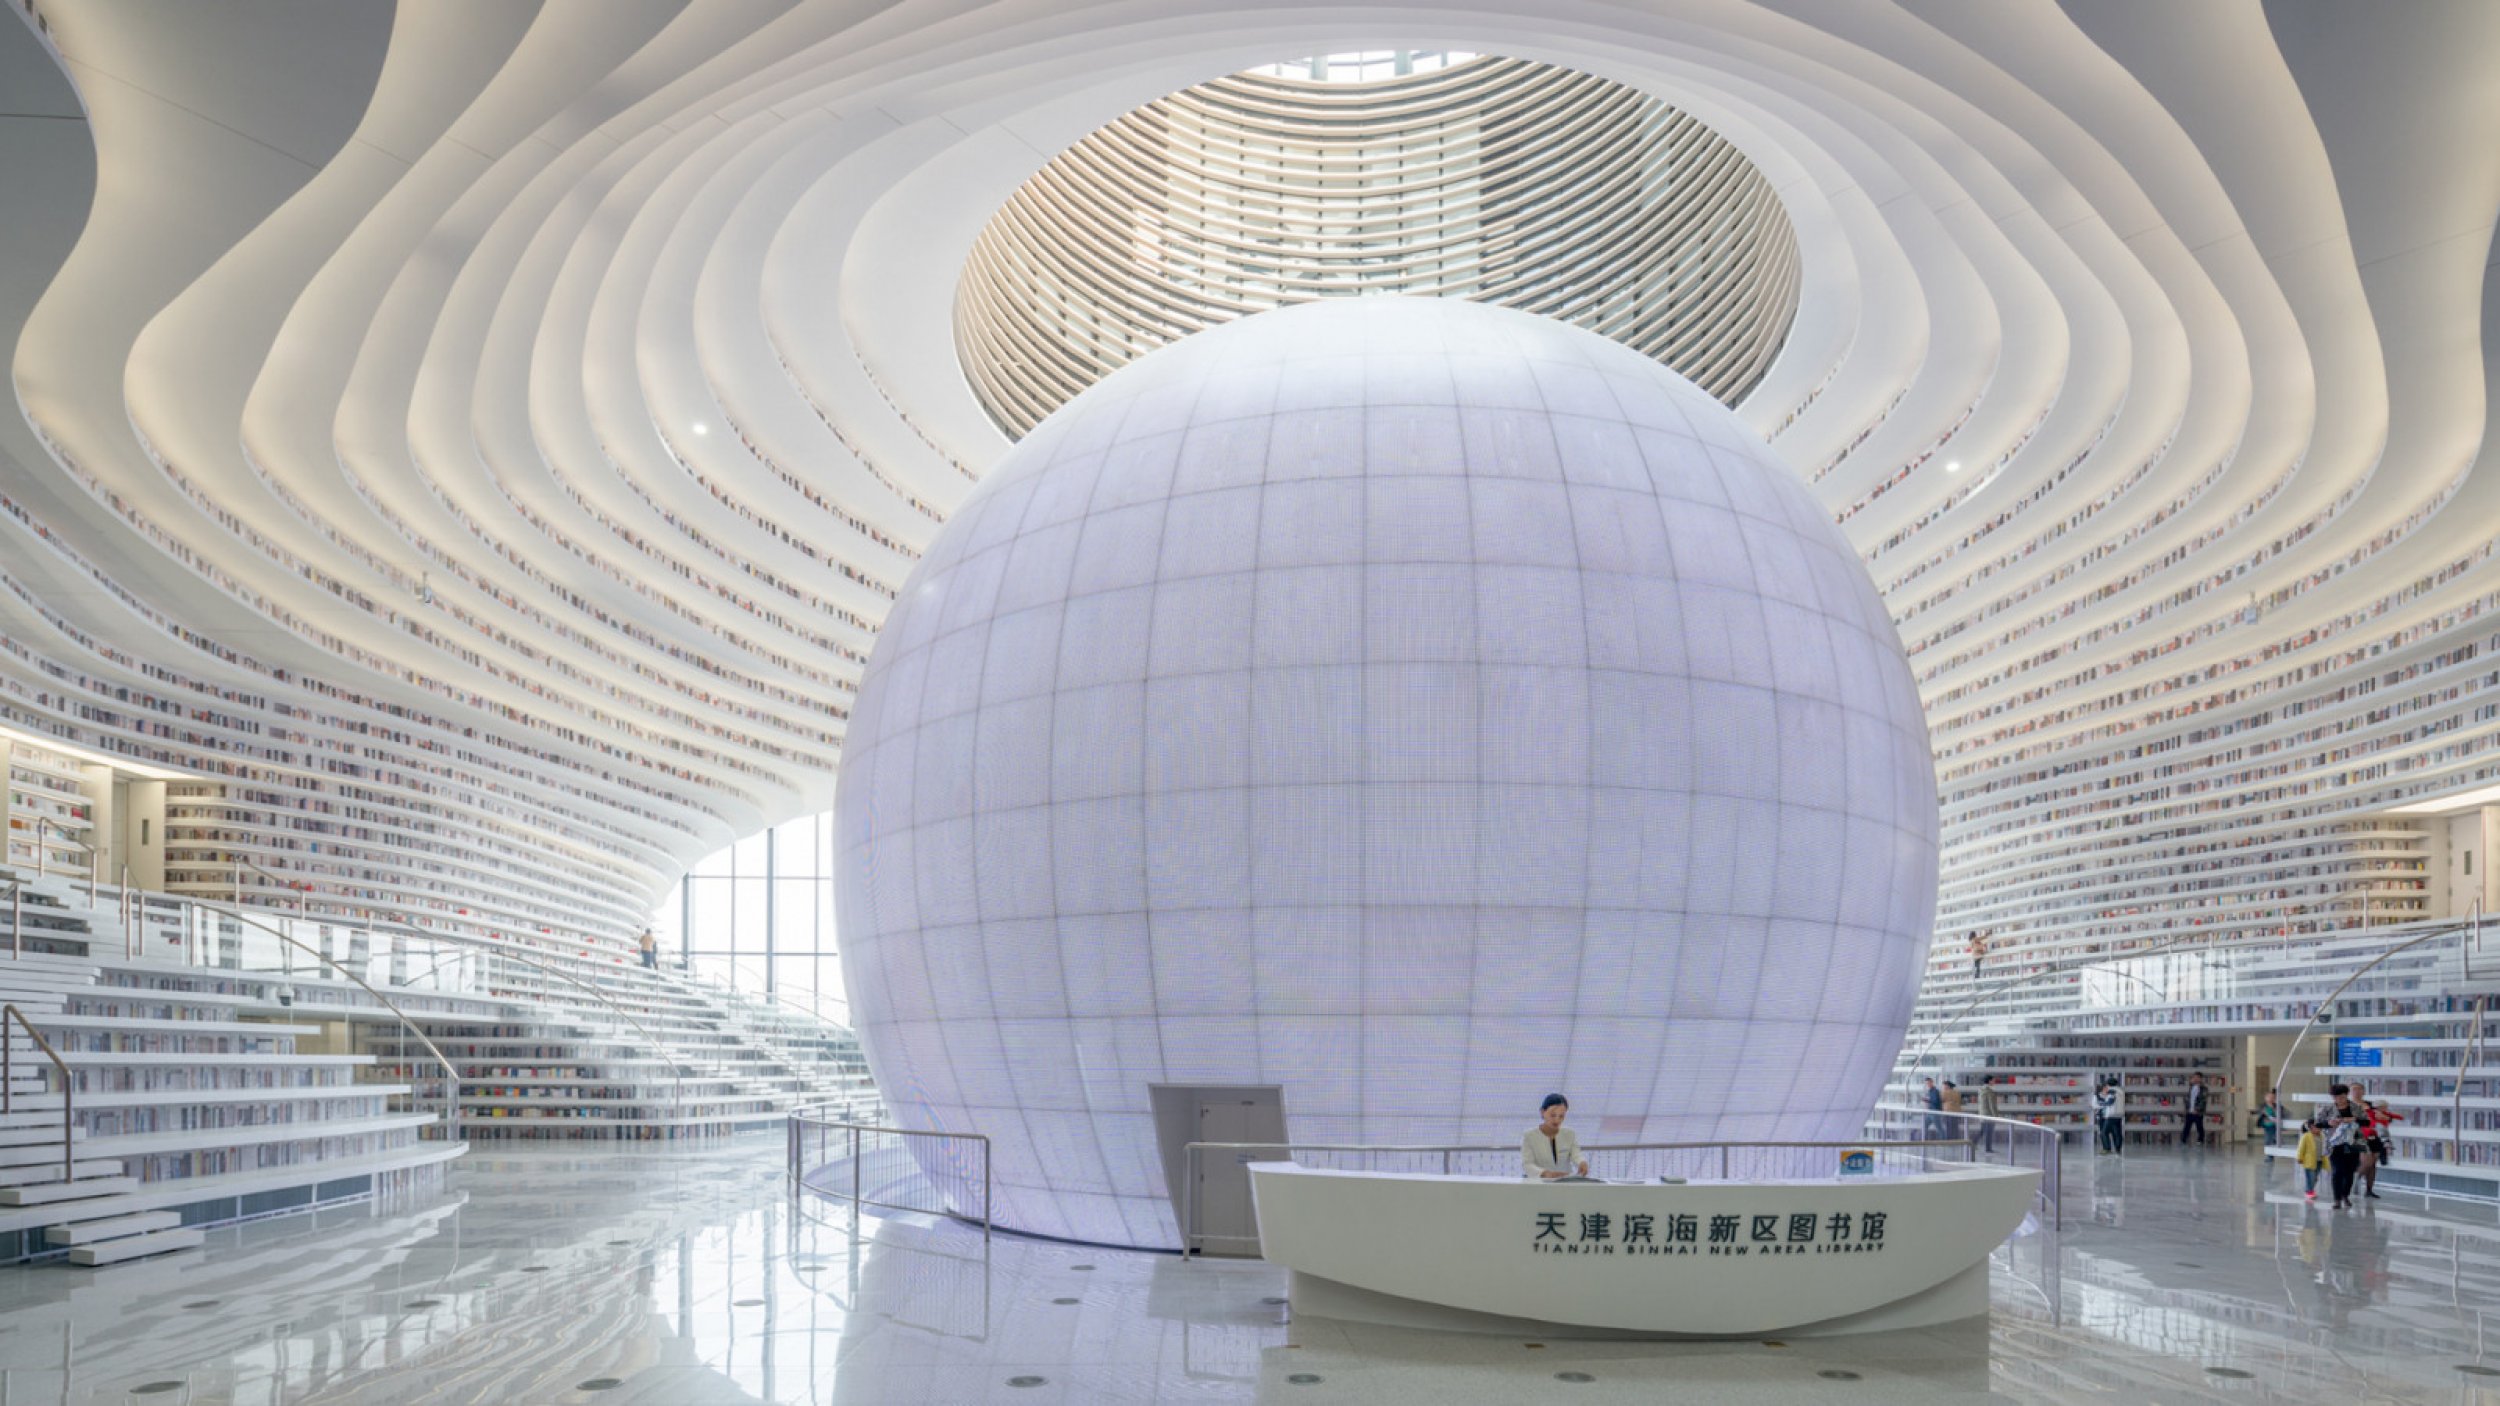 This Magnificent Library In China Is Shaped Like A Giant Eye